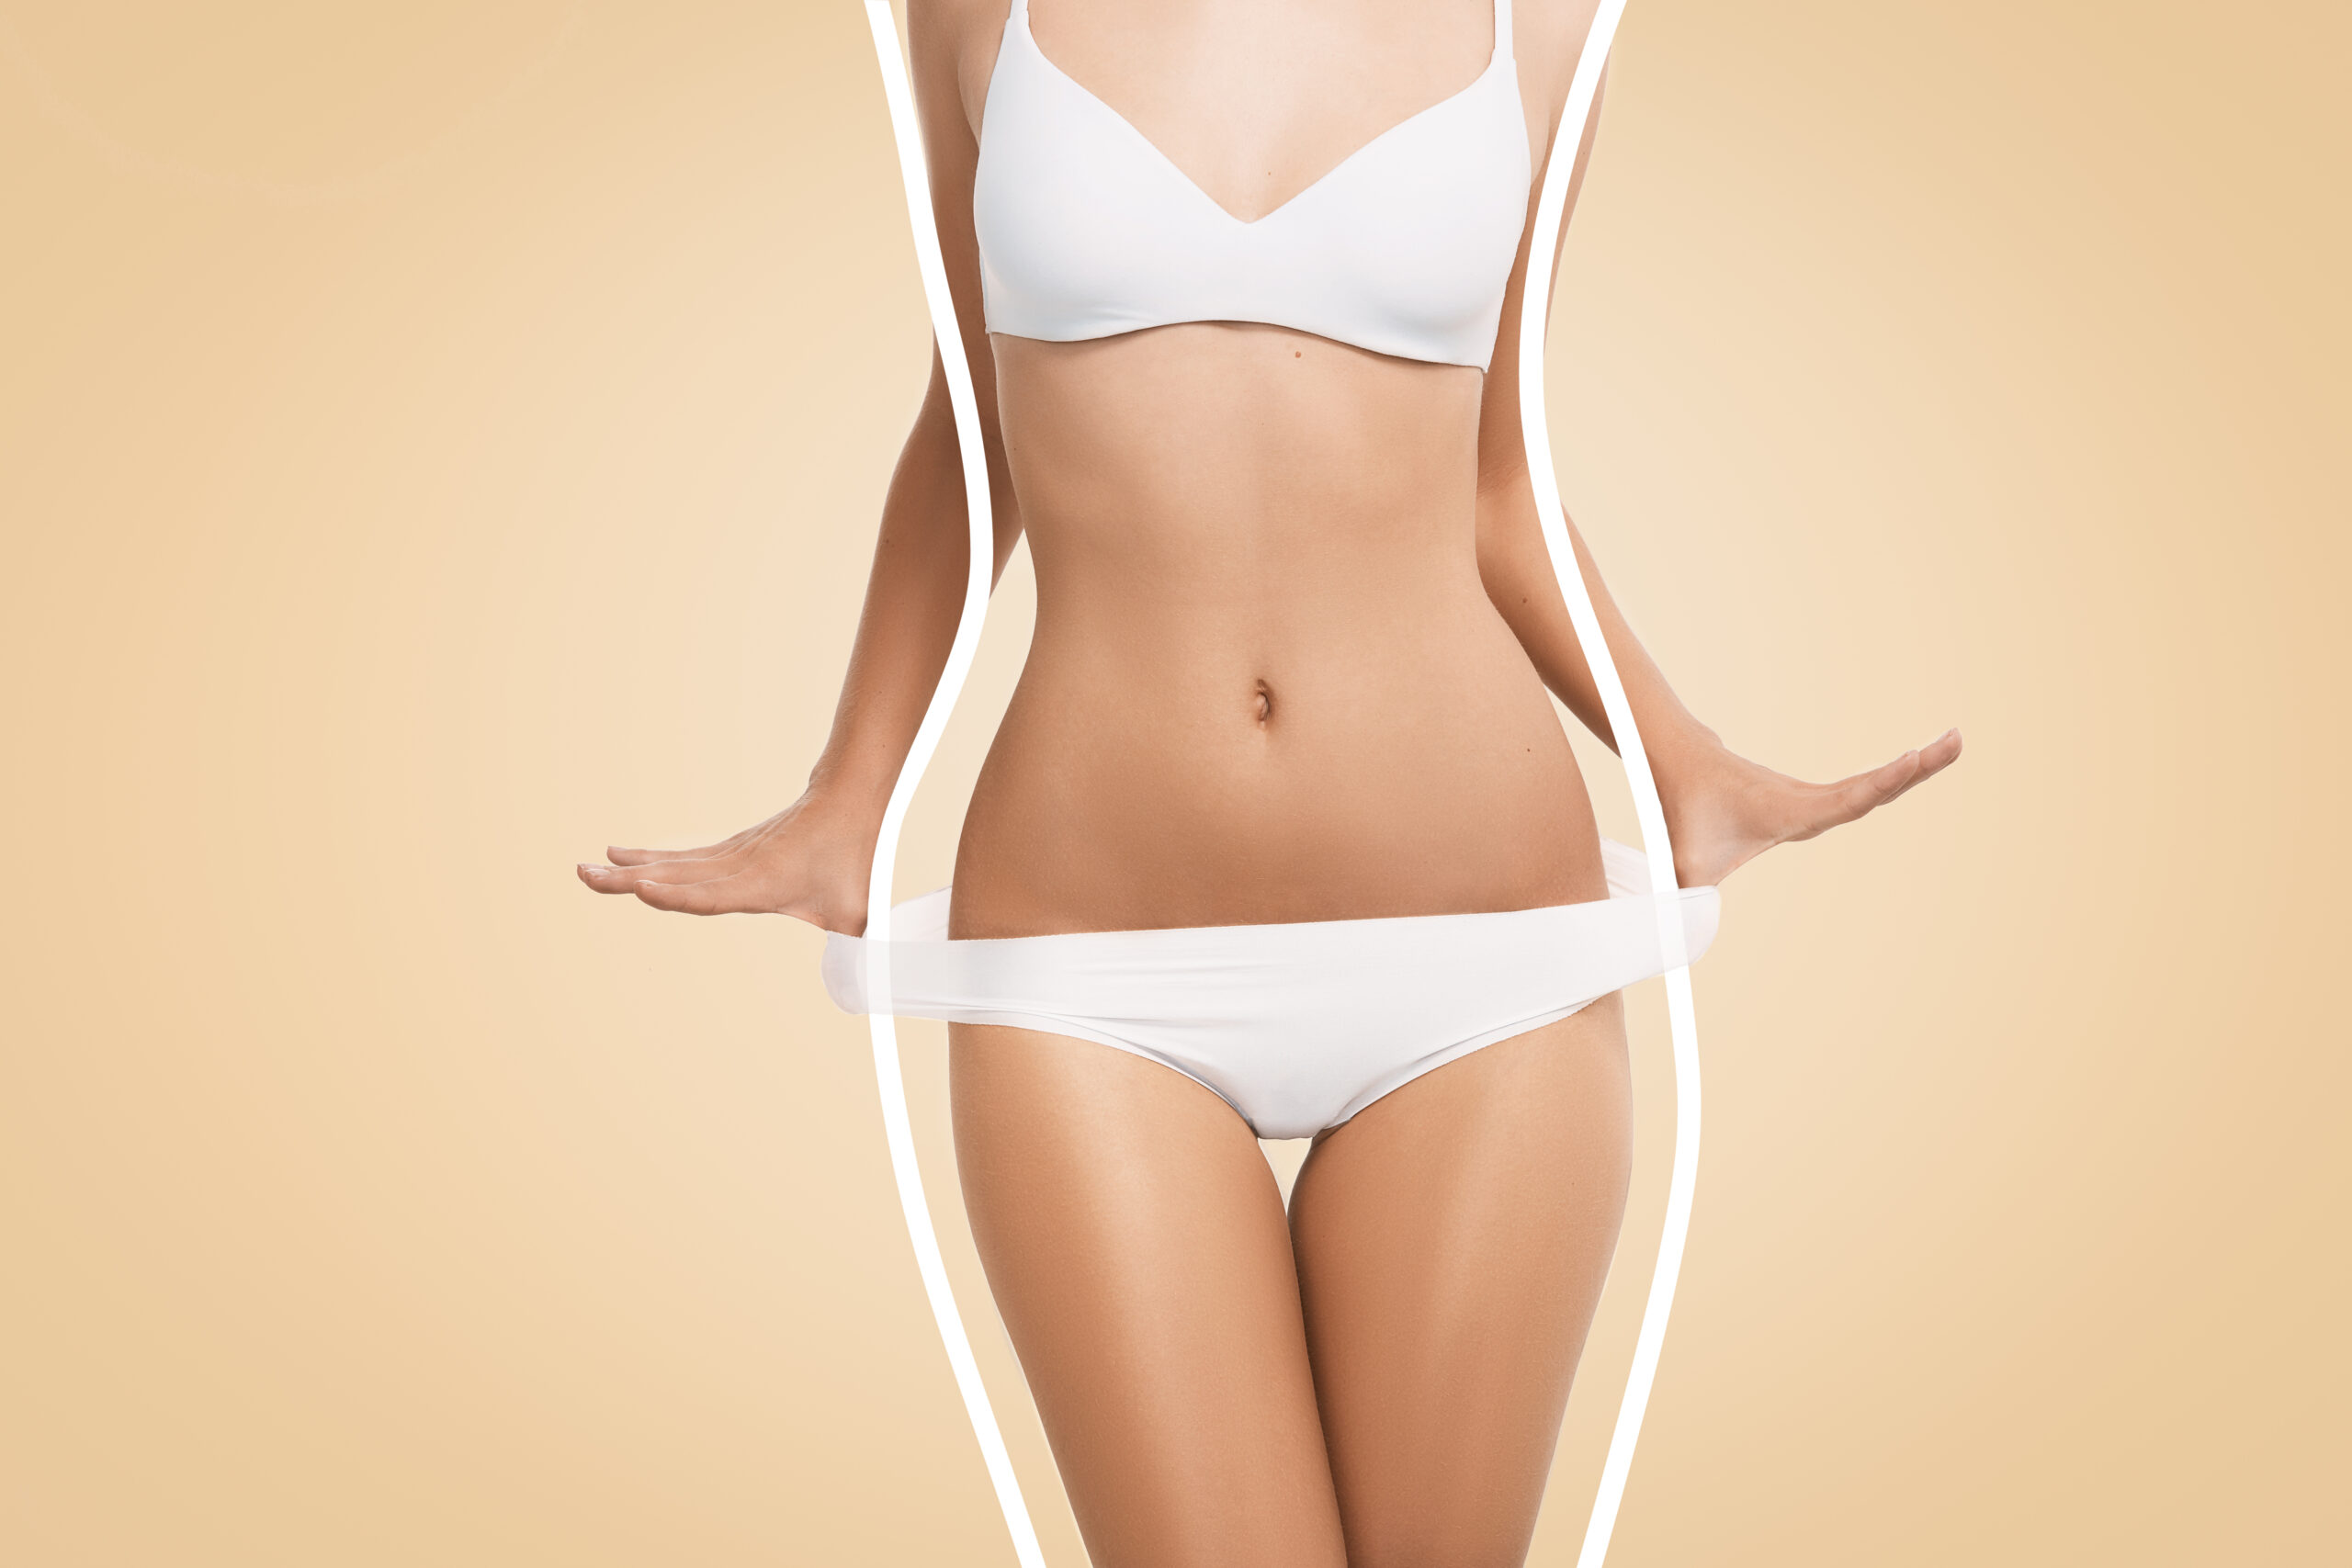 https://www.aadilakhan.com/wp-content/uploads/2023/03/Why-Would-You-Need-to-Lose-Weight-Before-a-Tummy-Tuck-scaled.jpg